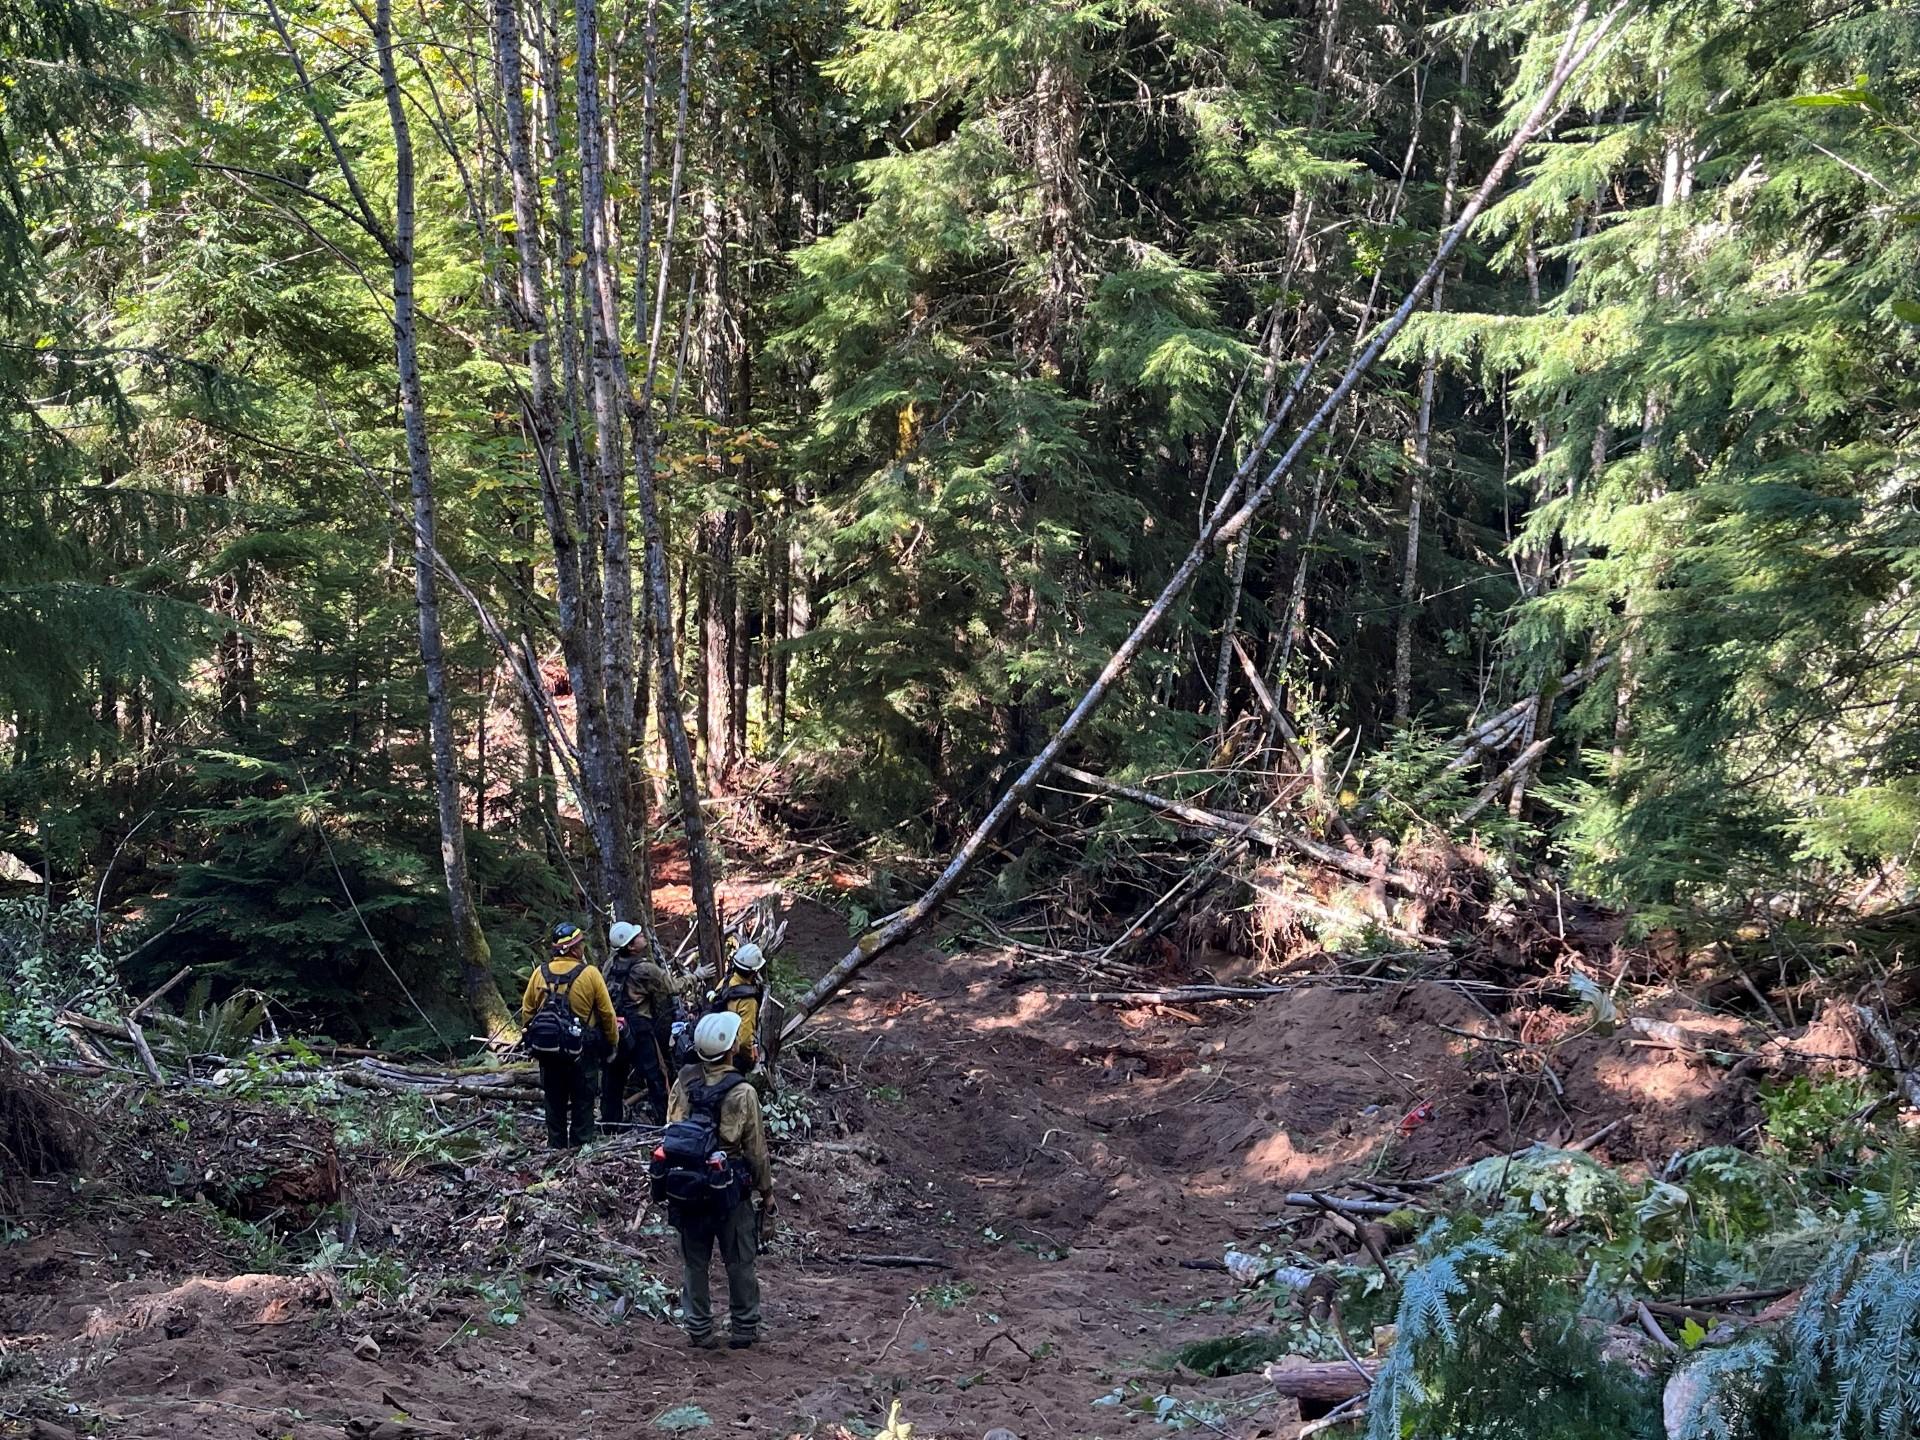 Image shows firefighters working to create an opening through a heavily forested areas.